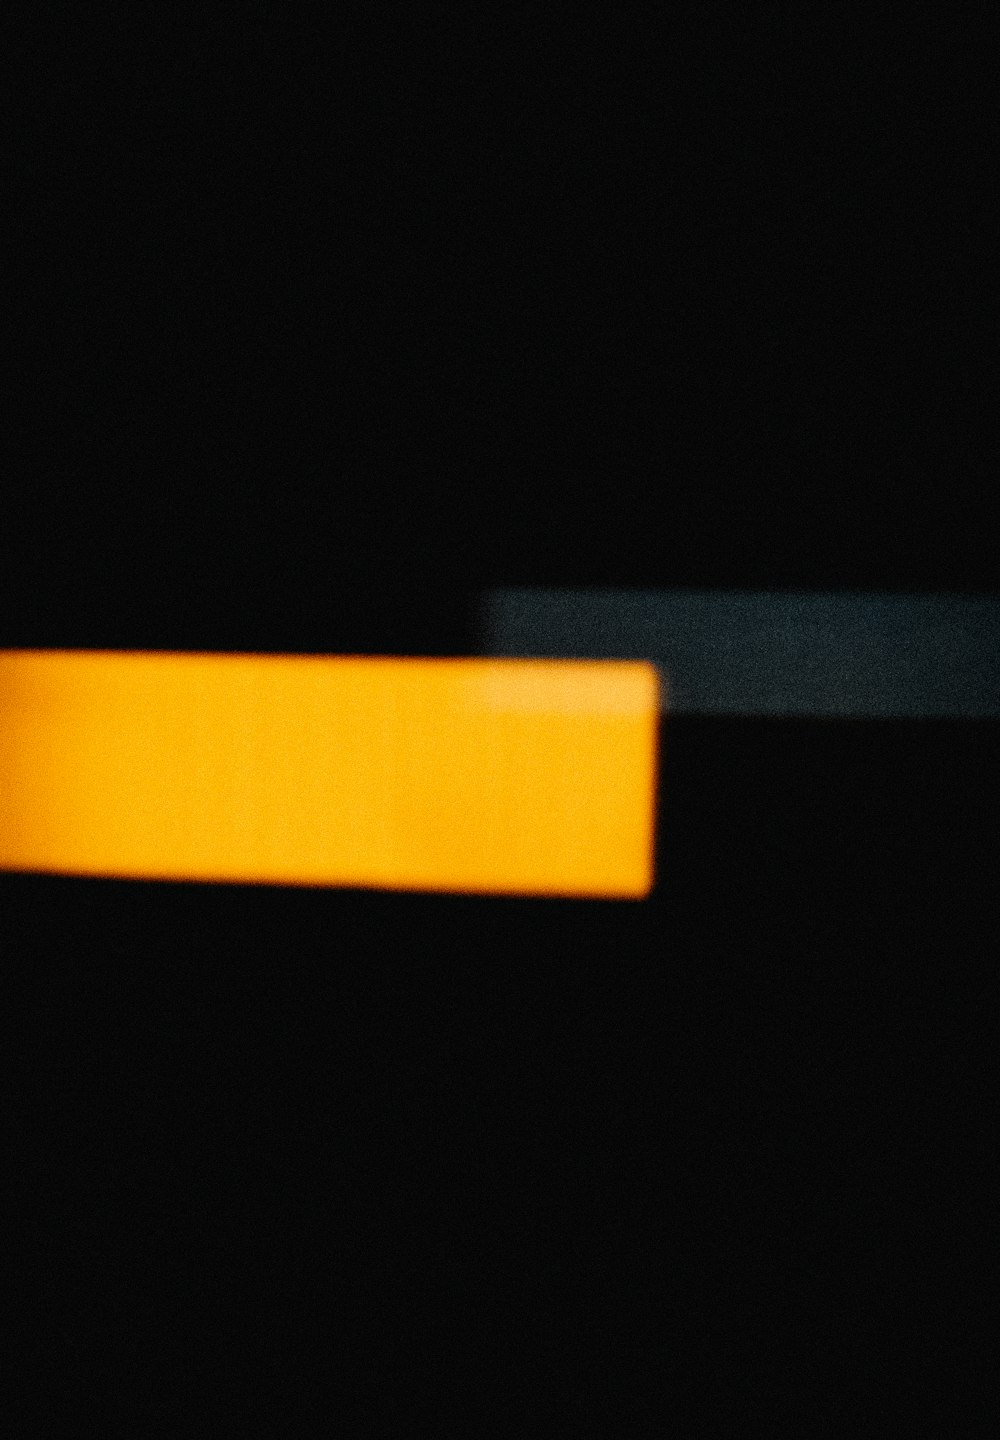 a blurry photo of a yellow object in the dark